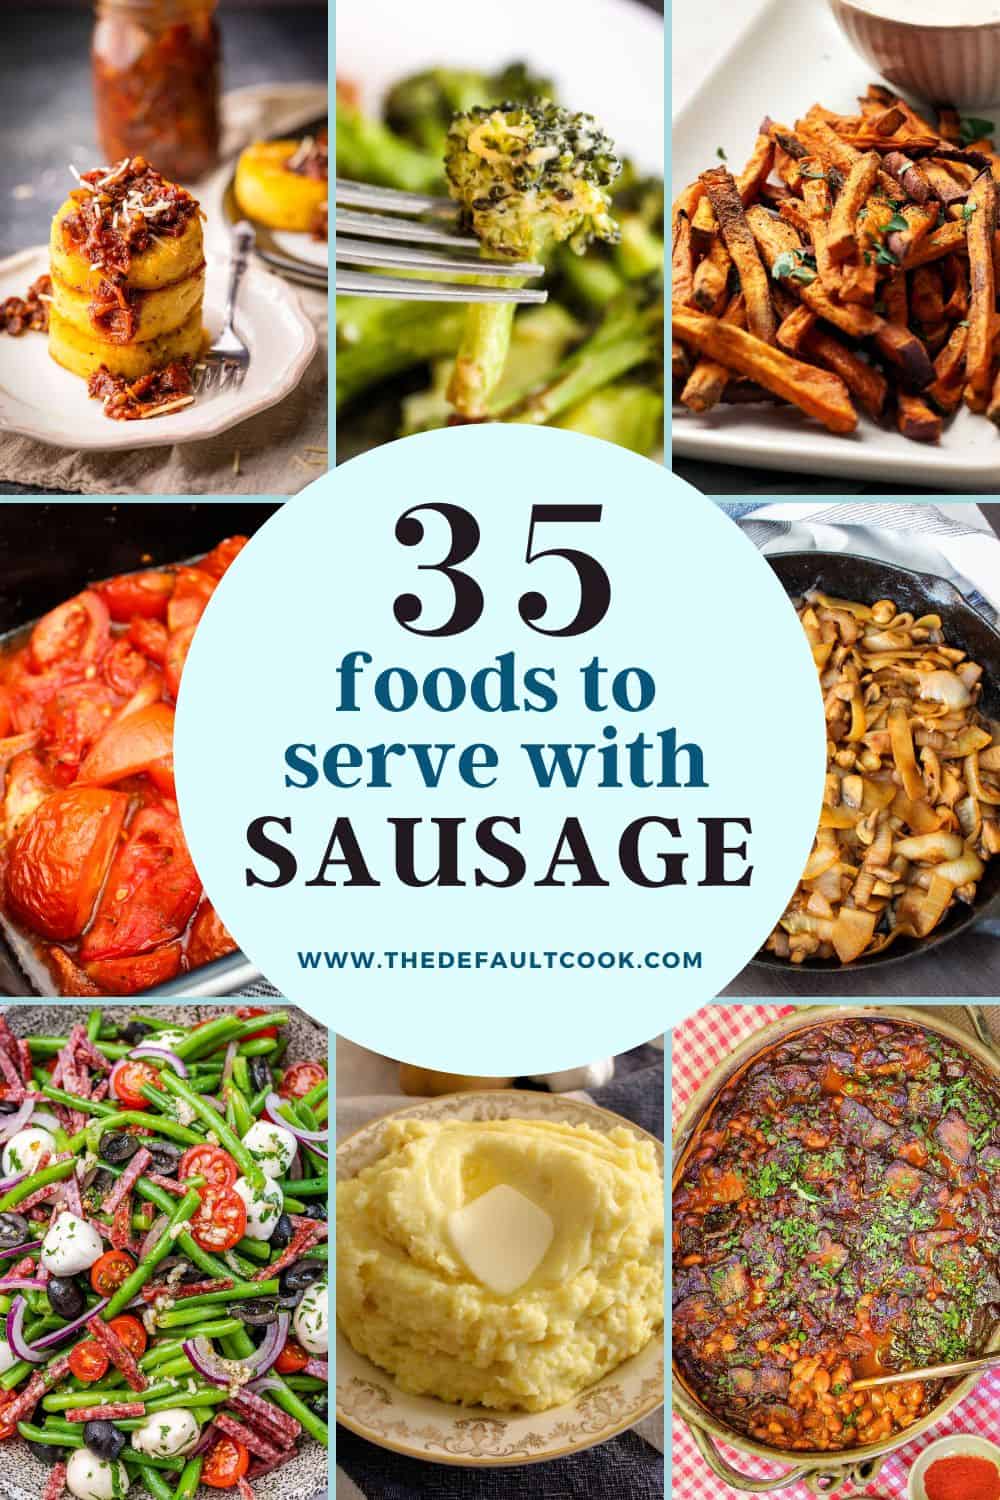 Collage of 9 food photos with text overlayed reading "35 foods to serve with sausage".